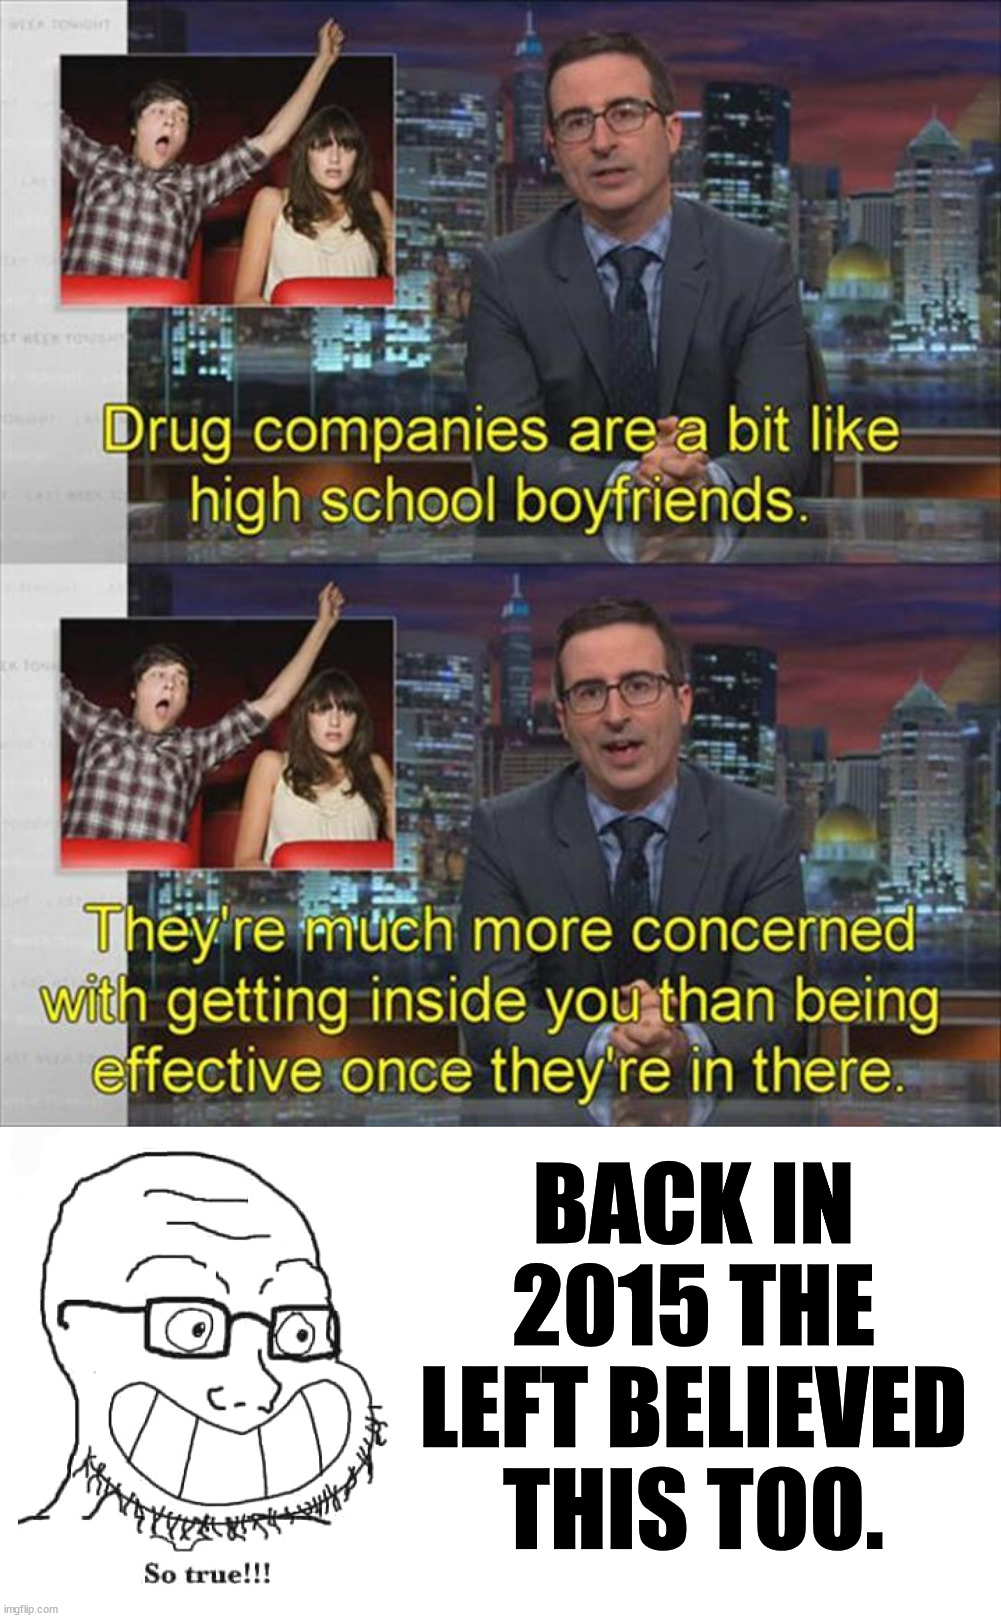 Once the left did not trust drug companies and hated the profit. | BACK IN 2015 THE LEFT BELIEVED THIS TOO. | image tagged in i don't believe in that made up nonsense so true,political meme | made w/ Imgflip meme maker